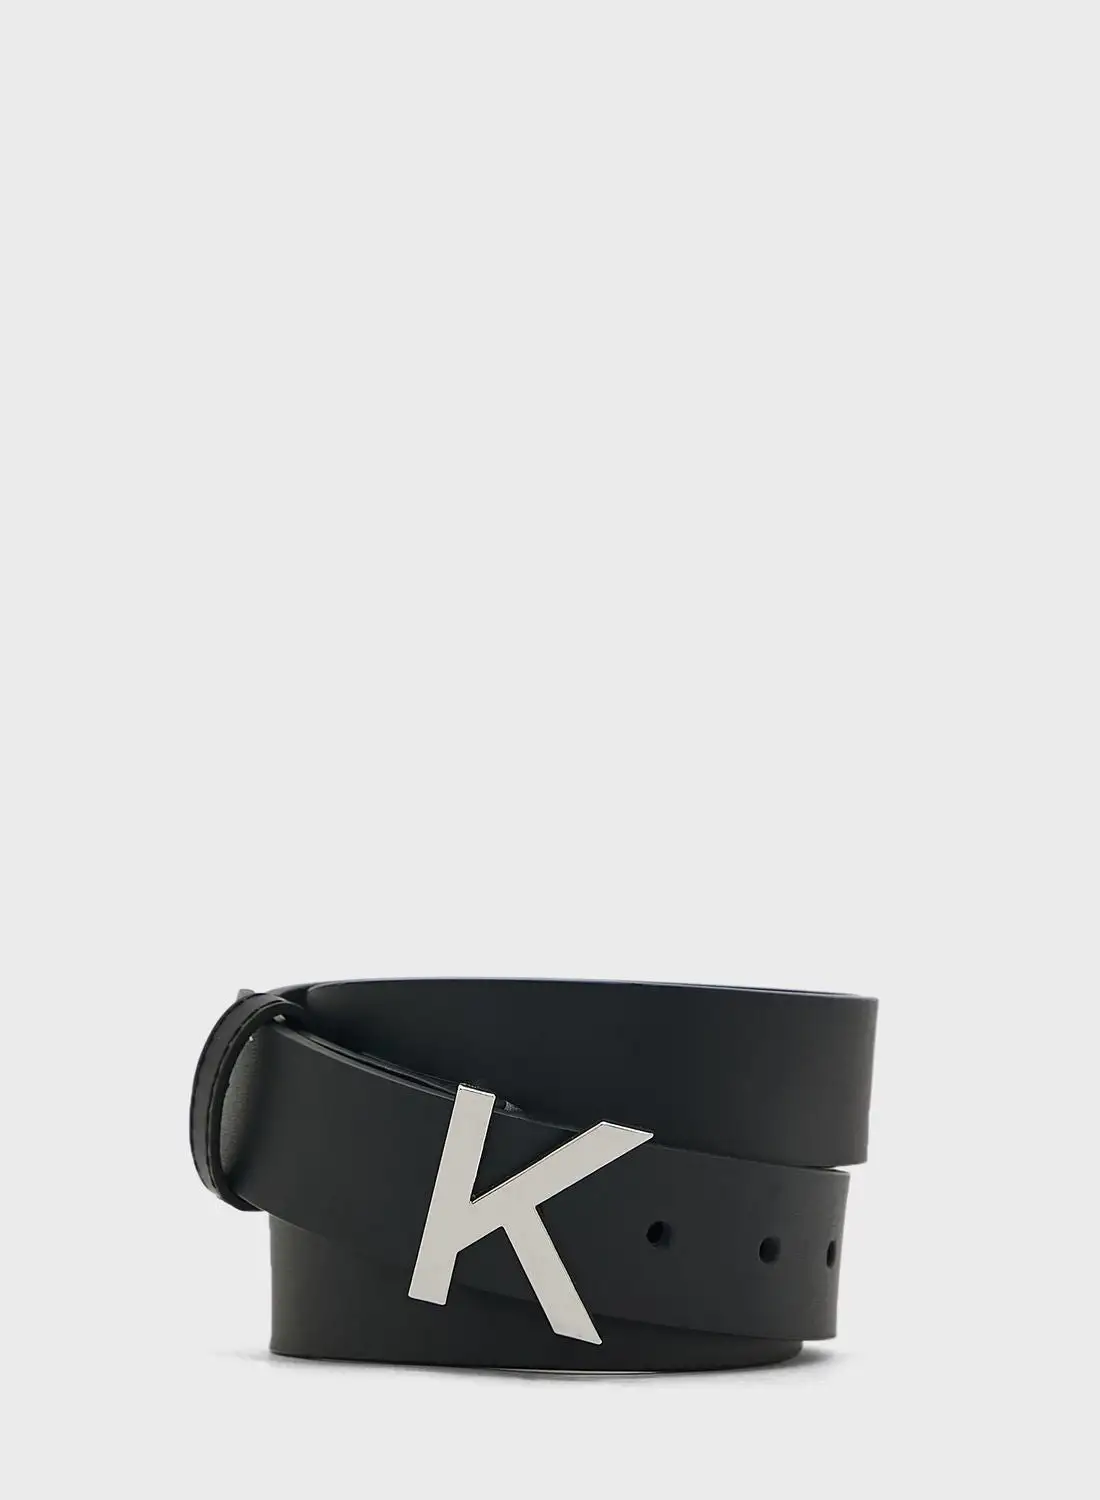 KENDALL + KYLIE Allocated Hole Belt